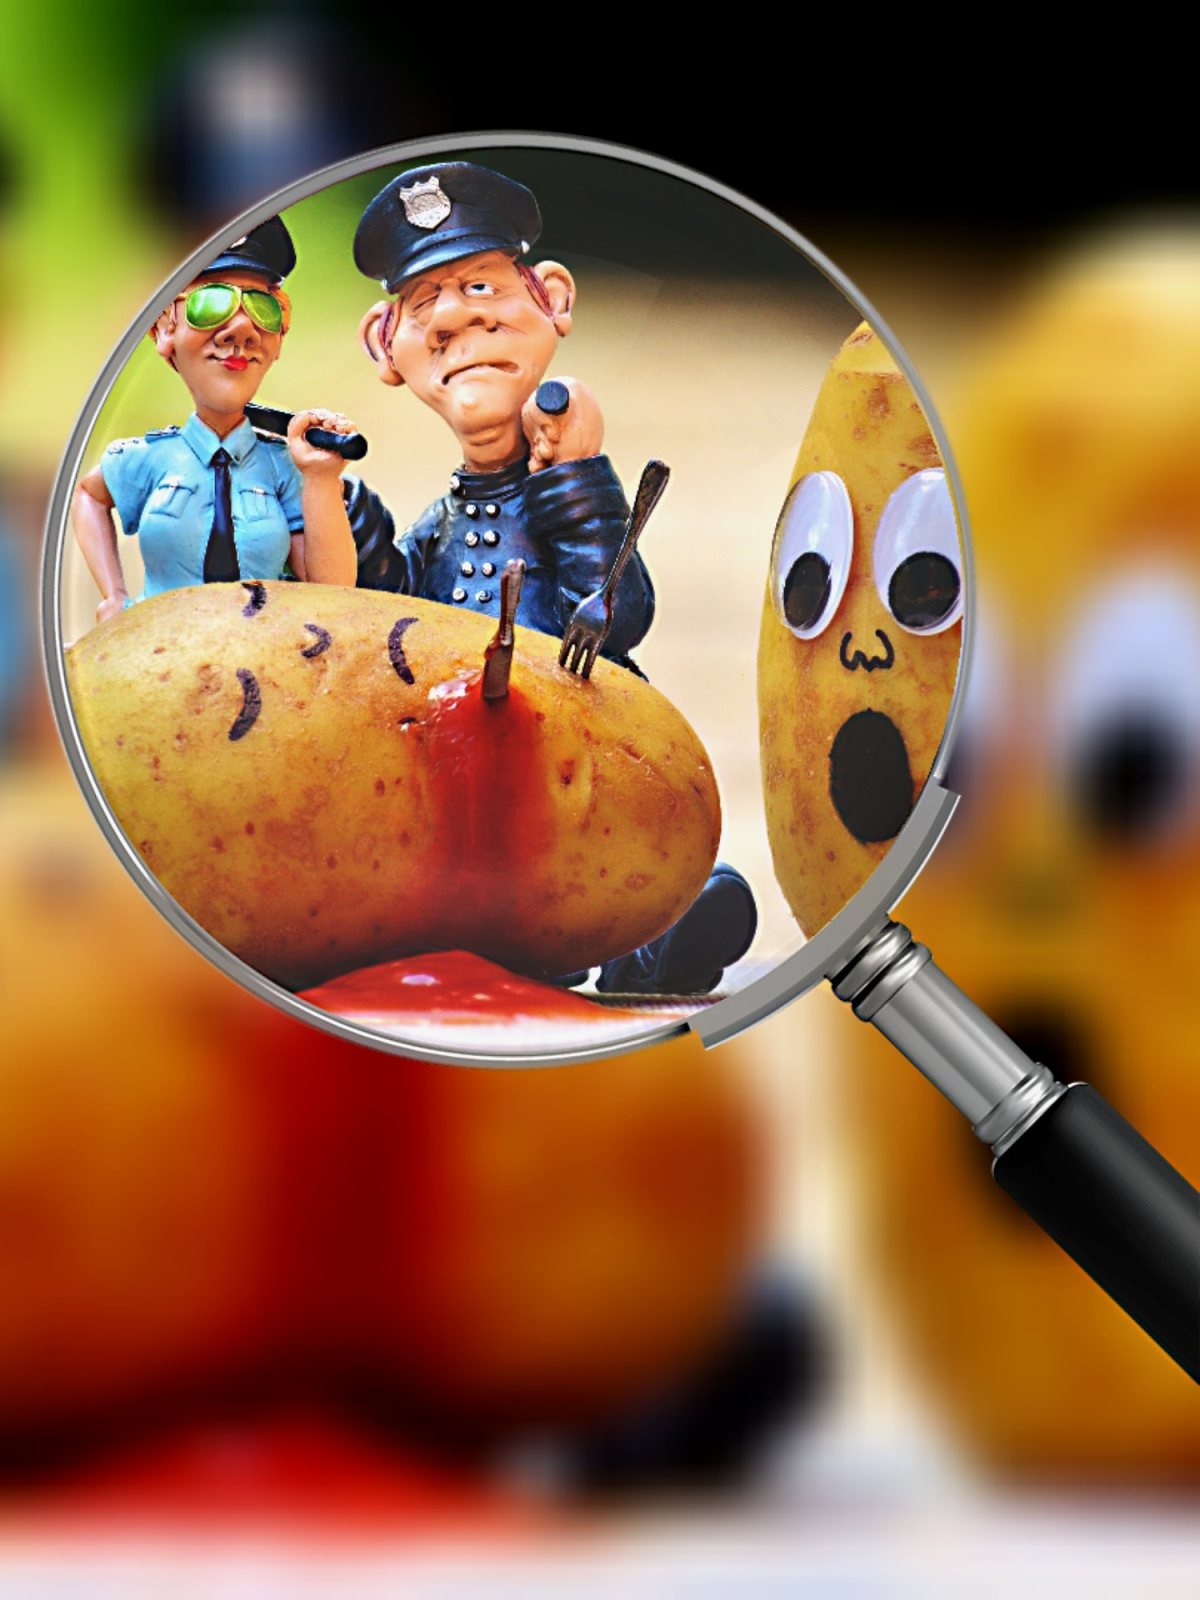 potatoes_murder_blood_police_search_for_clues_investigations-3.jpg